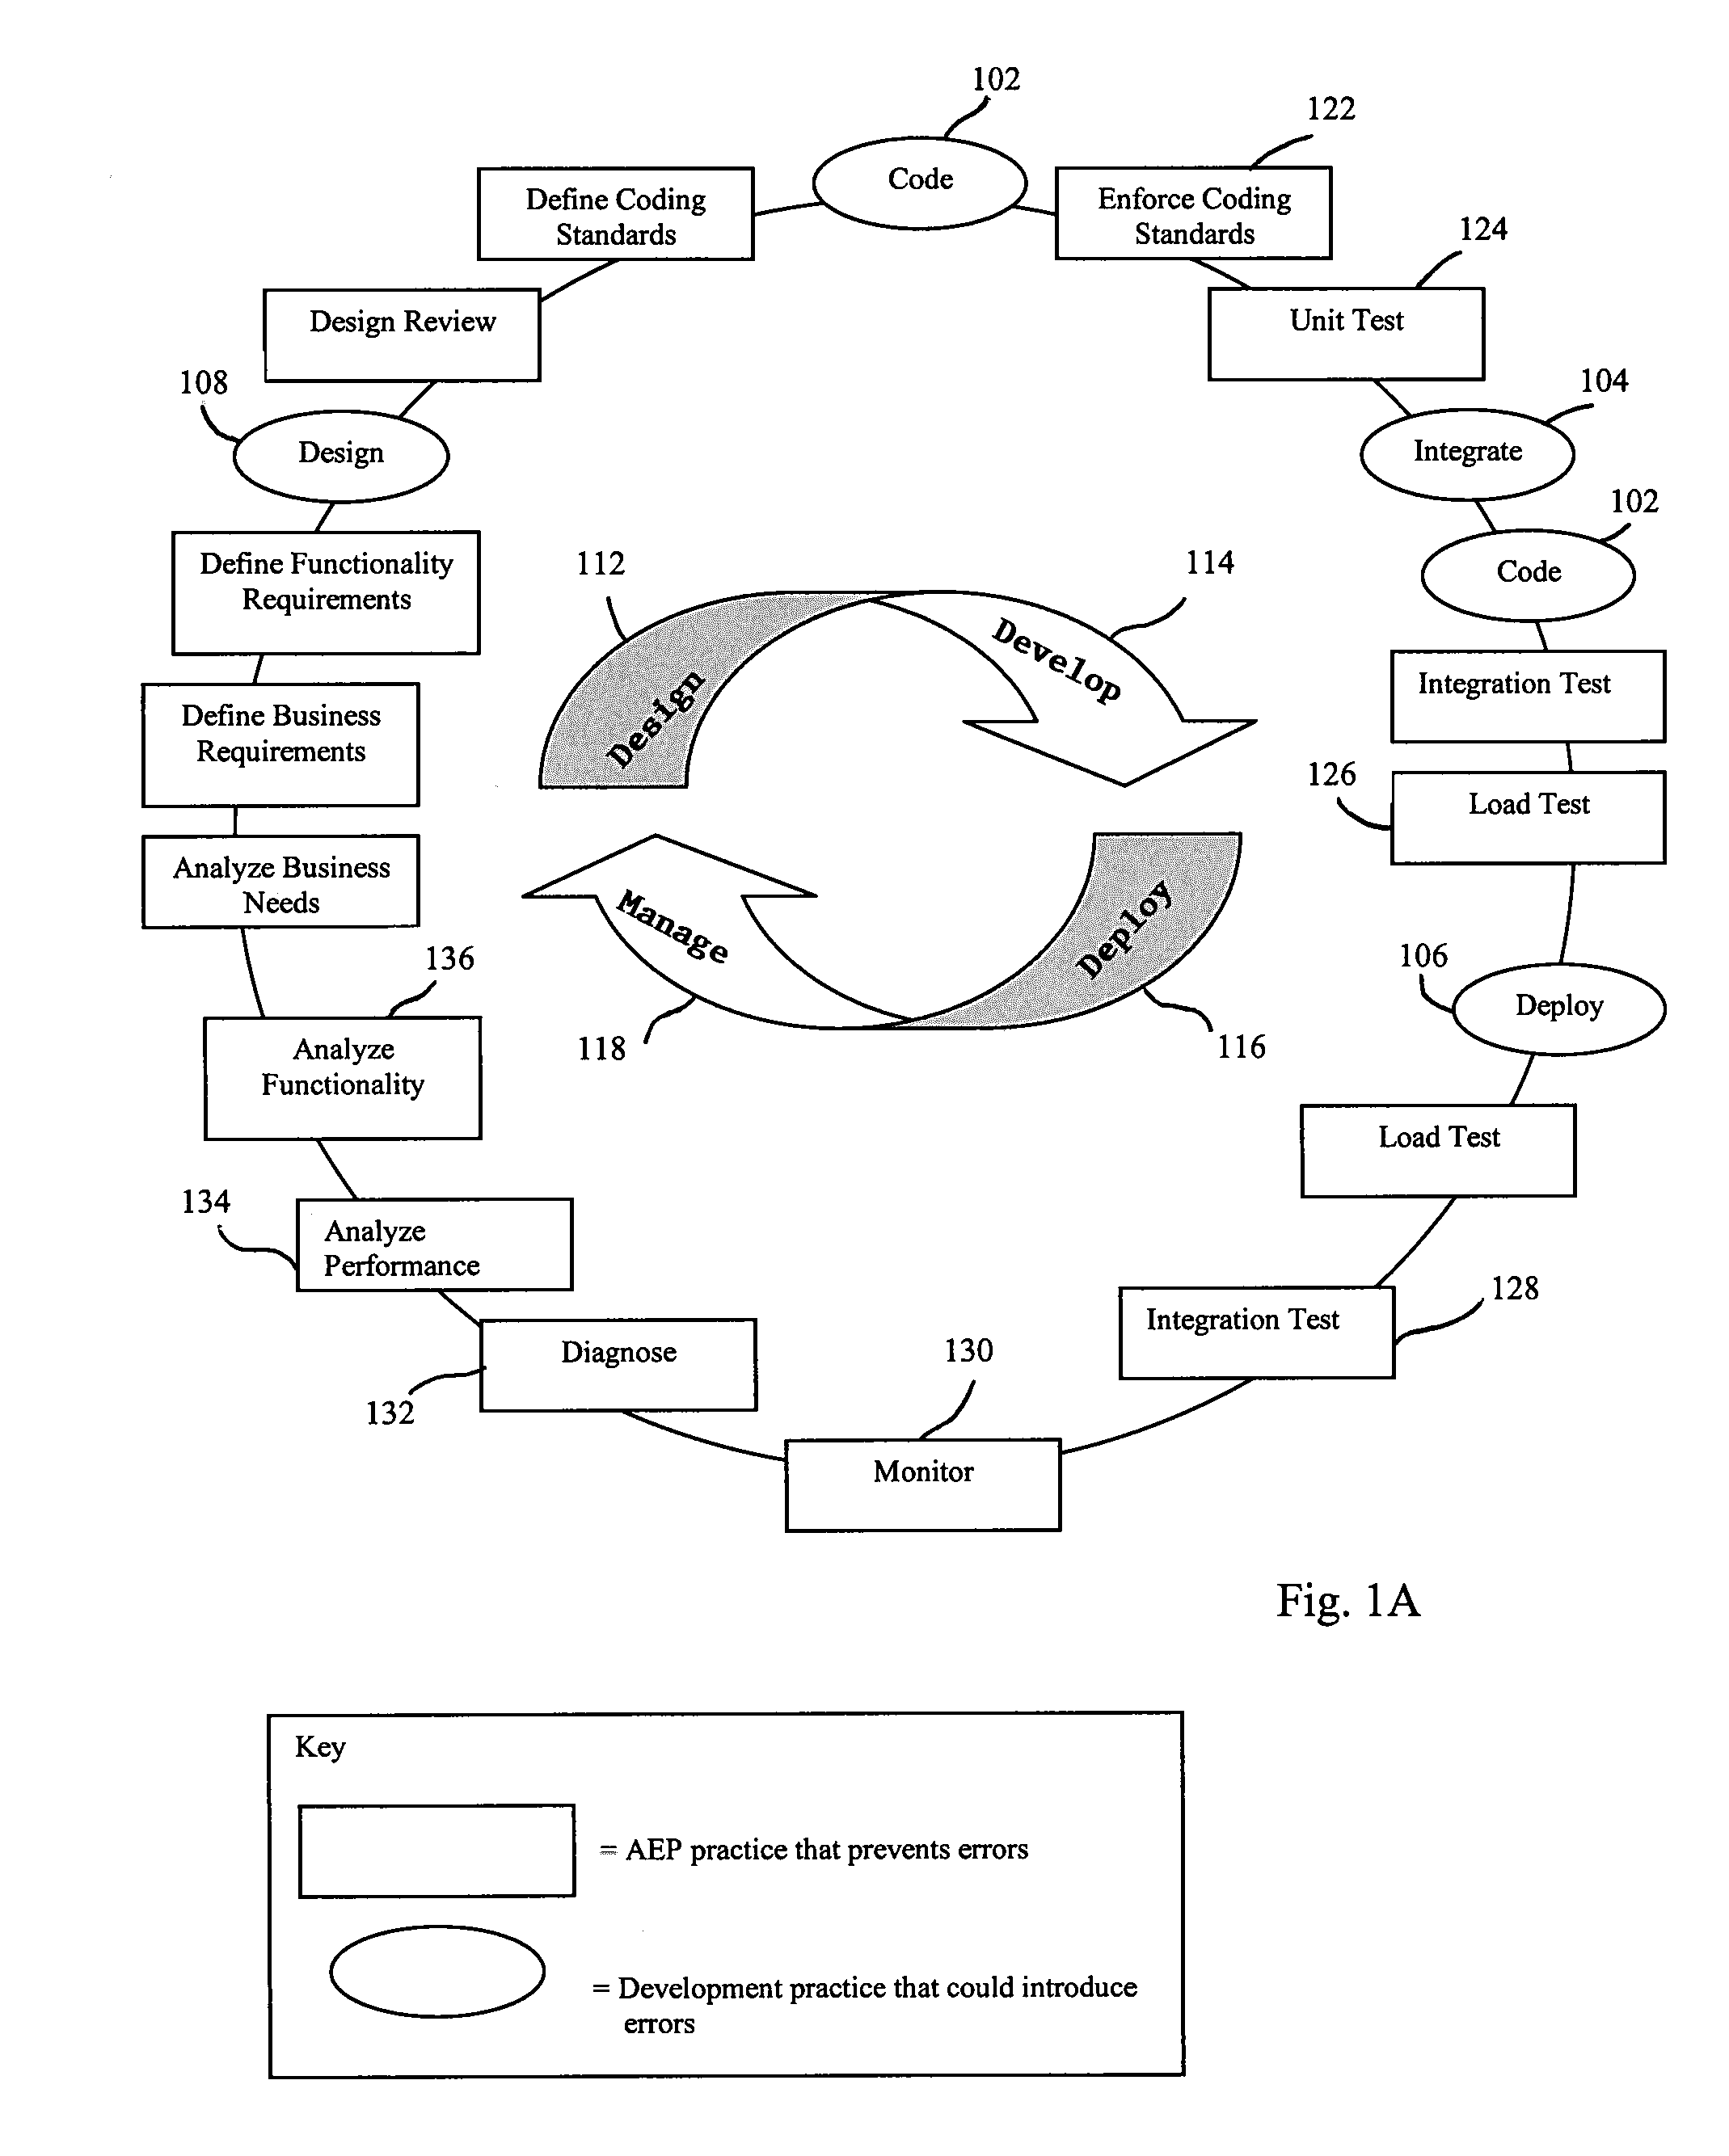 Method and system for automatic error prevention for computer software